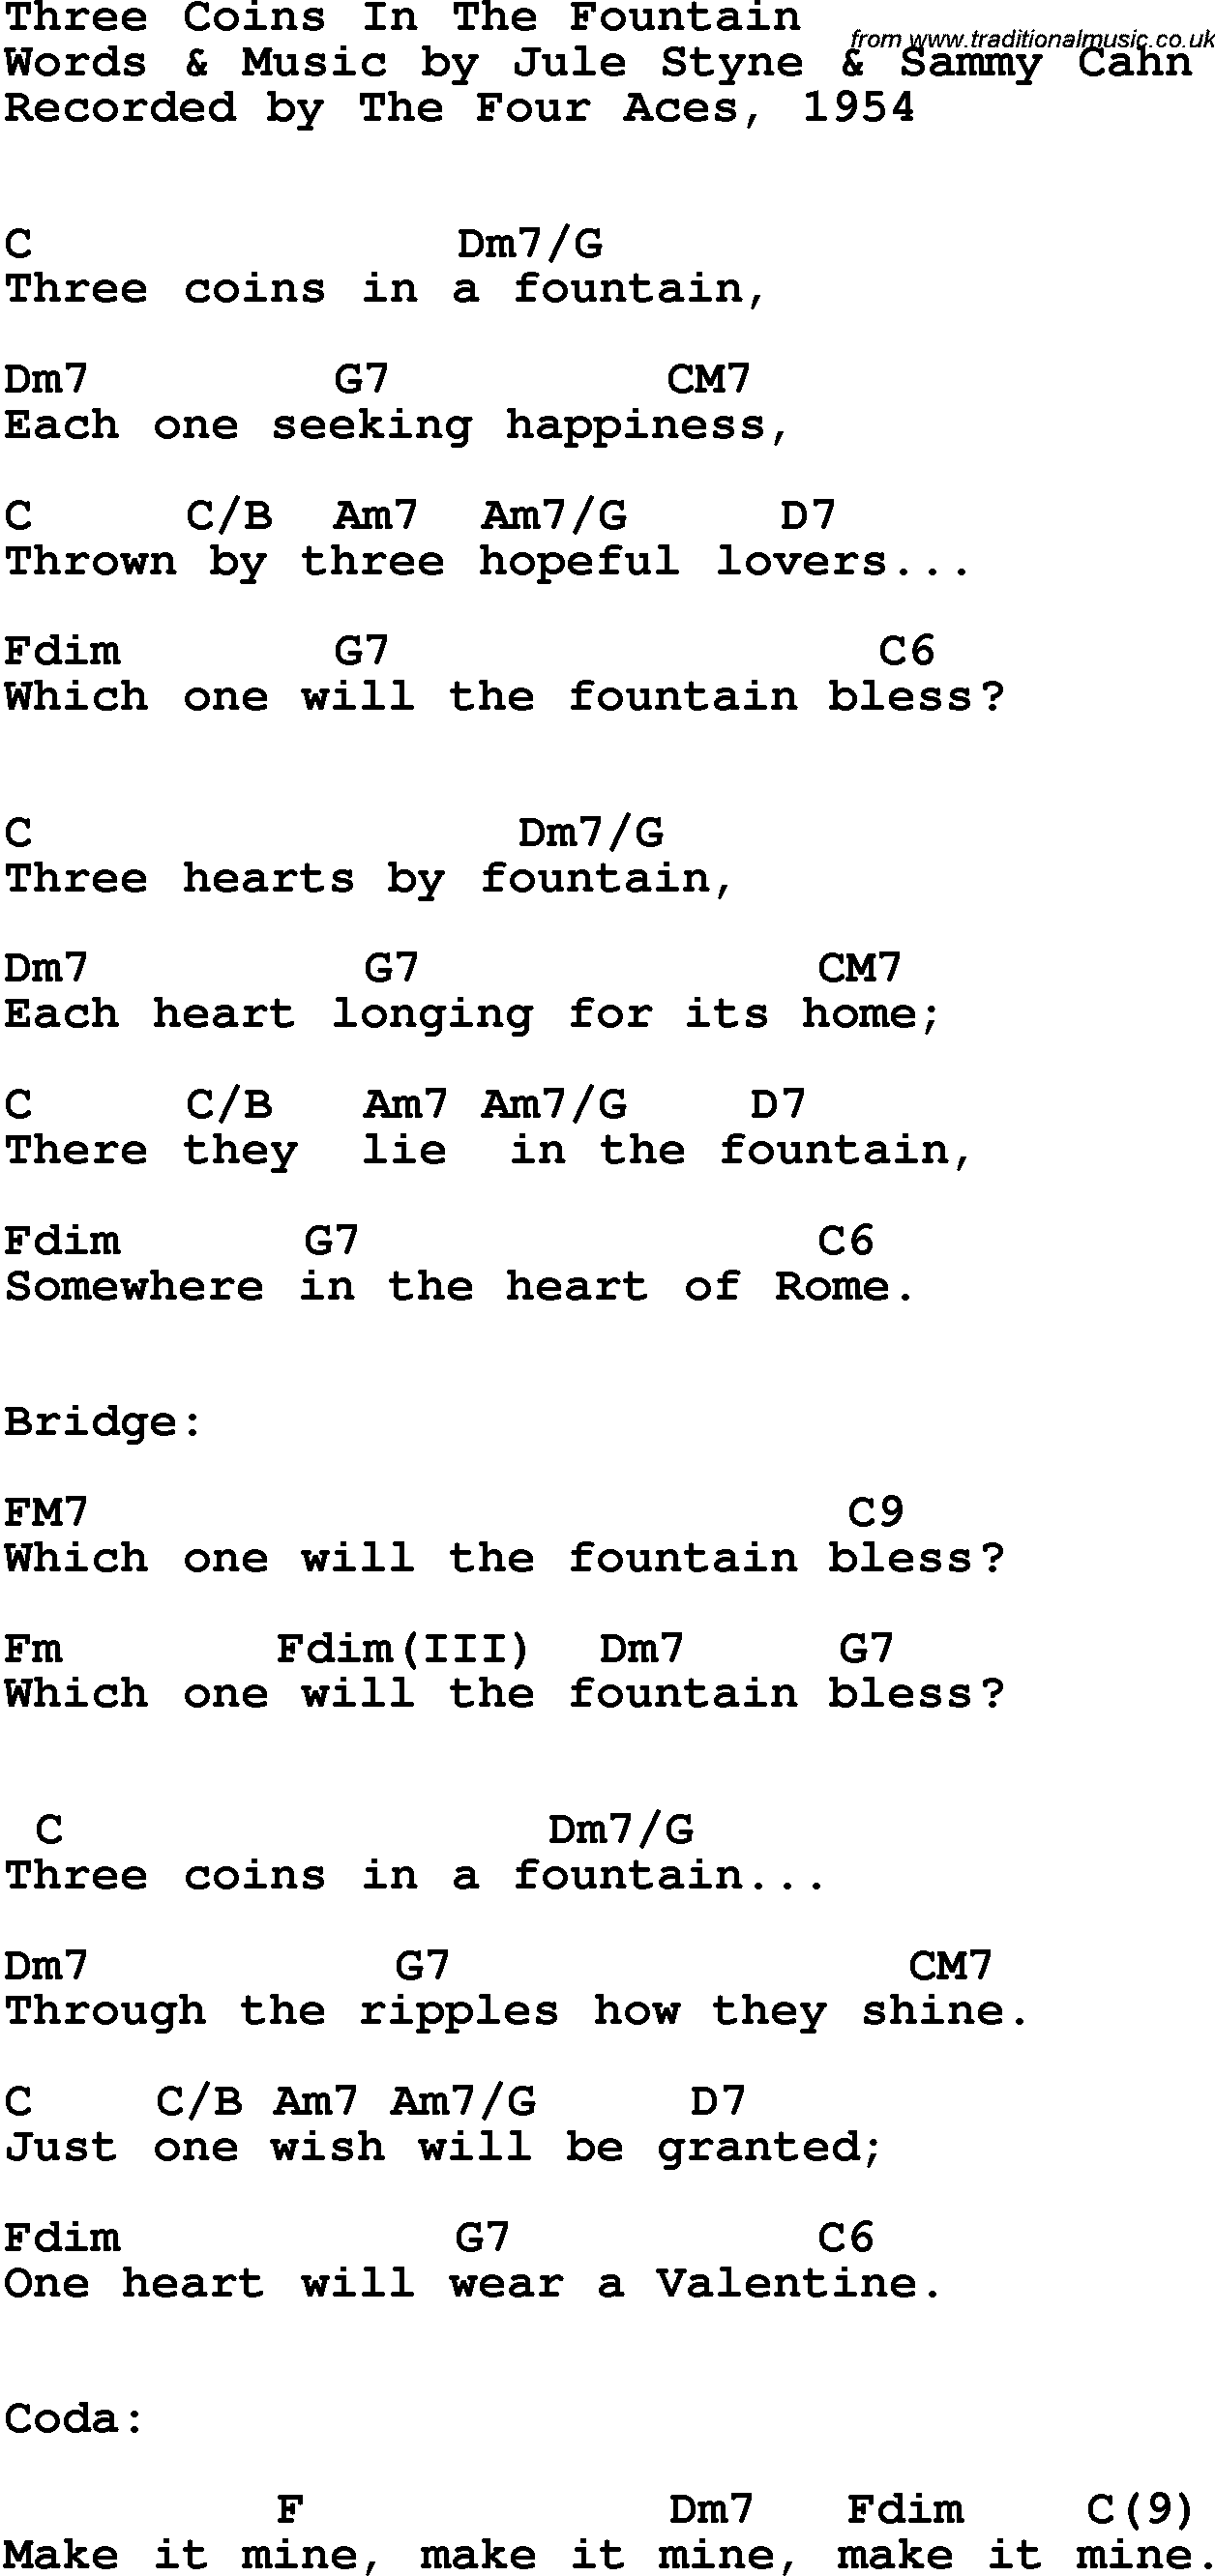 Song Lyrics with guitar chords for Three Coins In The Fountain - The Four Aces, 1954